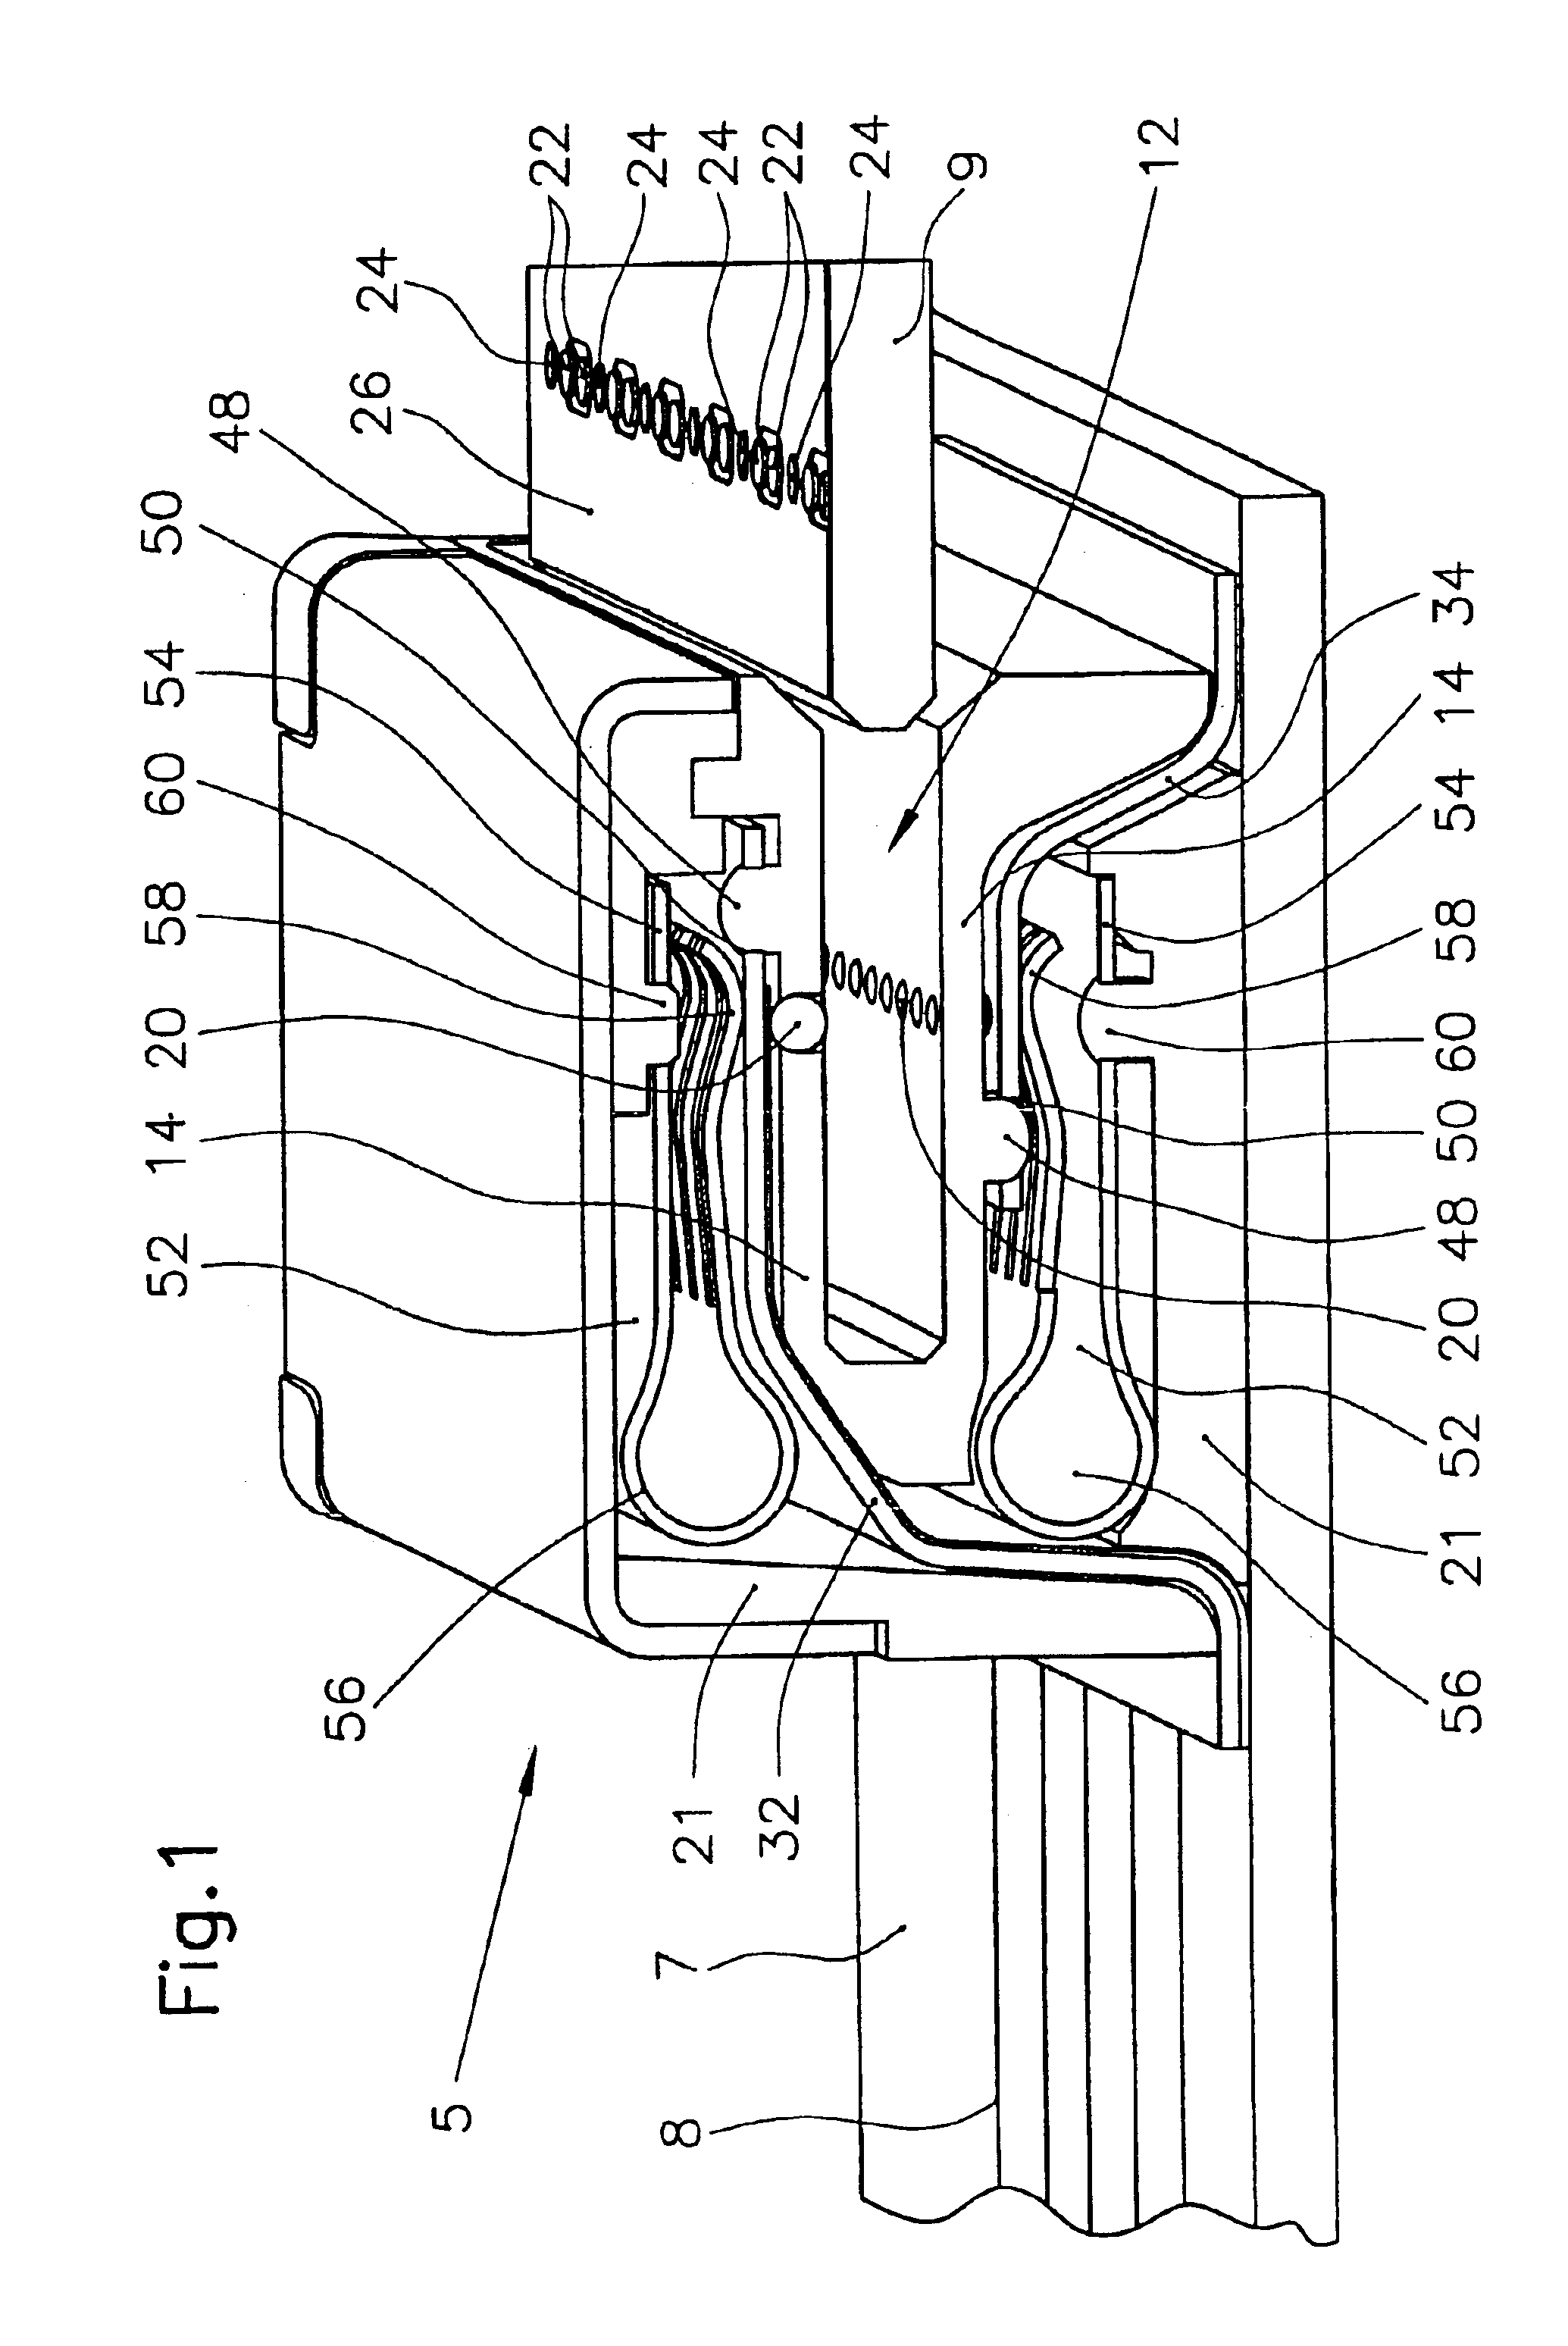 Connector with movable contact elements